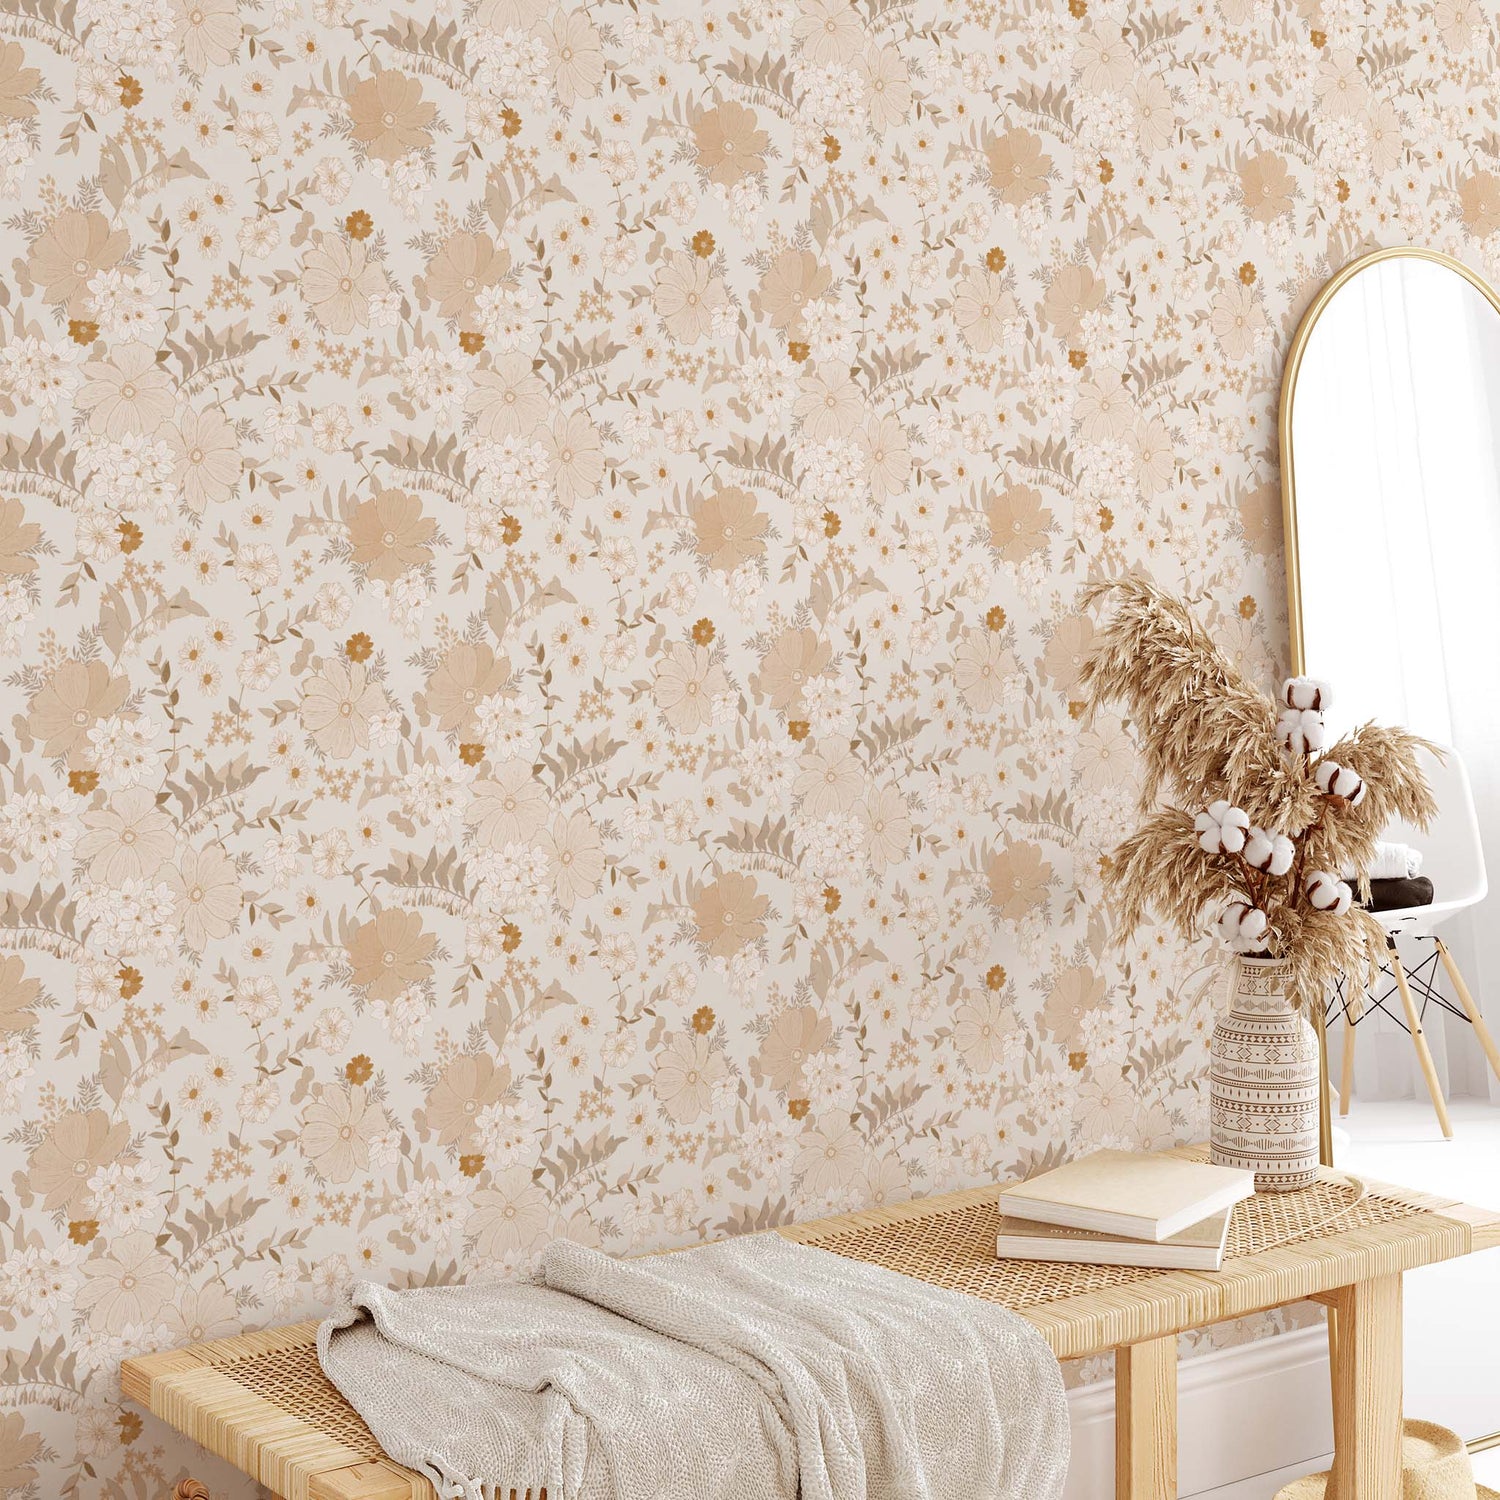 Make your walls bloom with delight! Our Spring Florals Wallpaper in Cream is a statement-making solution, featuring elegant flowers to add a touch of springtime beauty to your home.